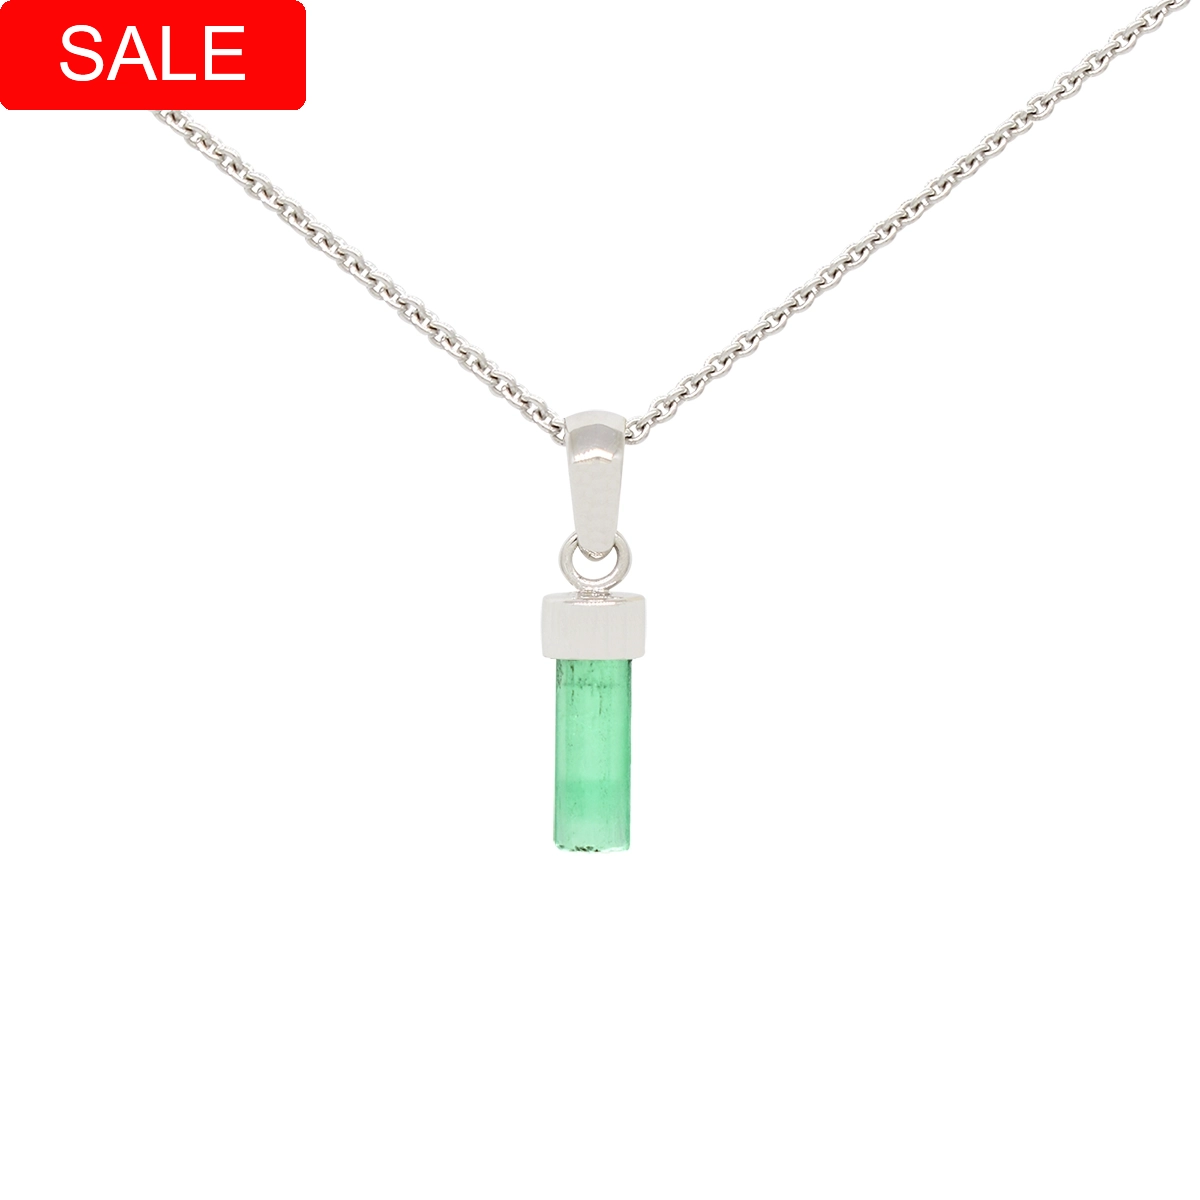 Emerald pendant in 18K white gold with 0.75 Ct. uncut genuine natural Colombian emerald in its raw stage with light green color